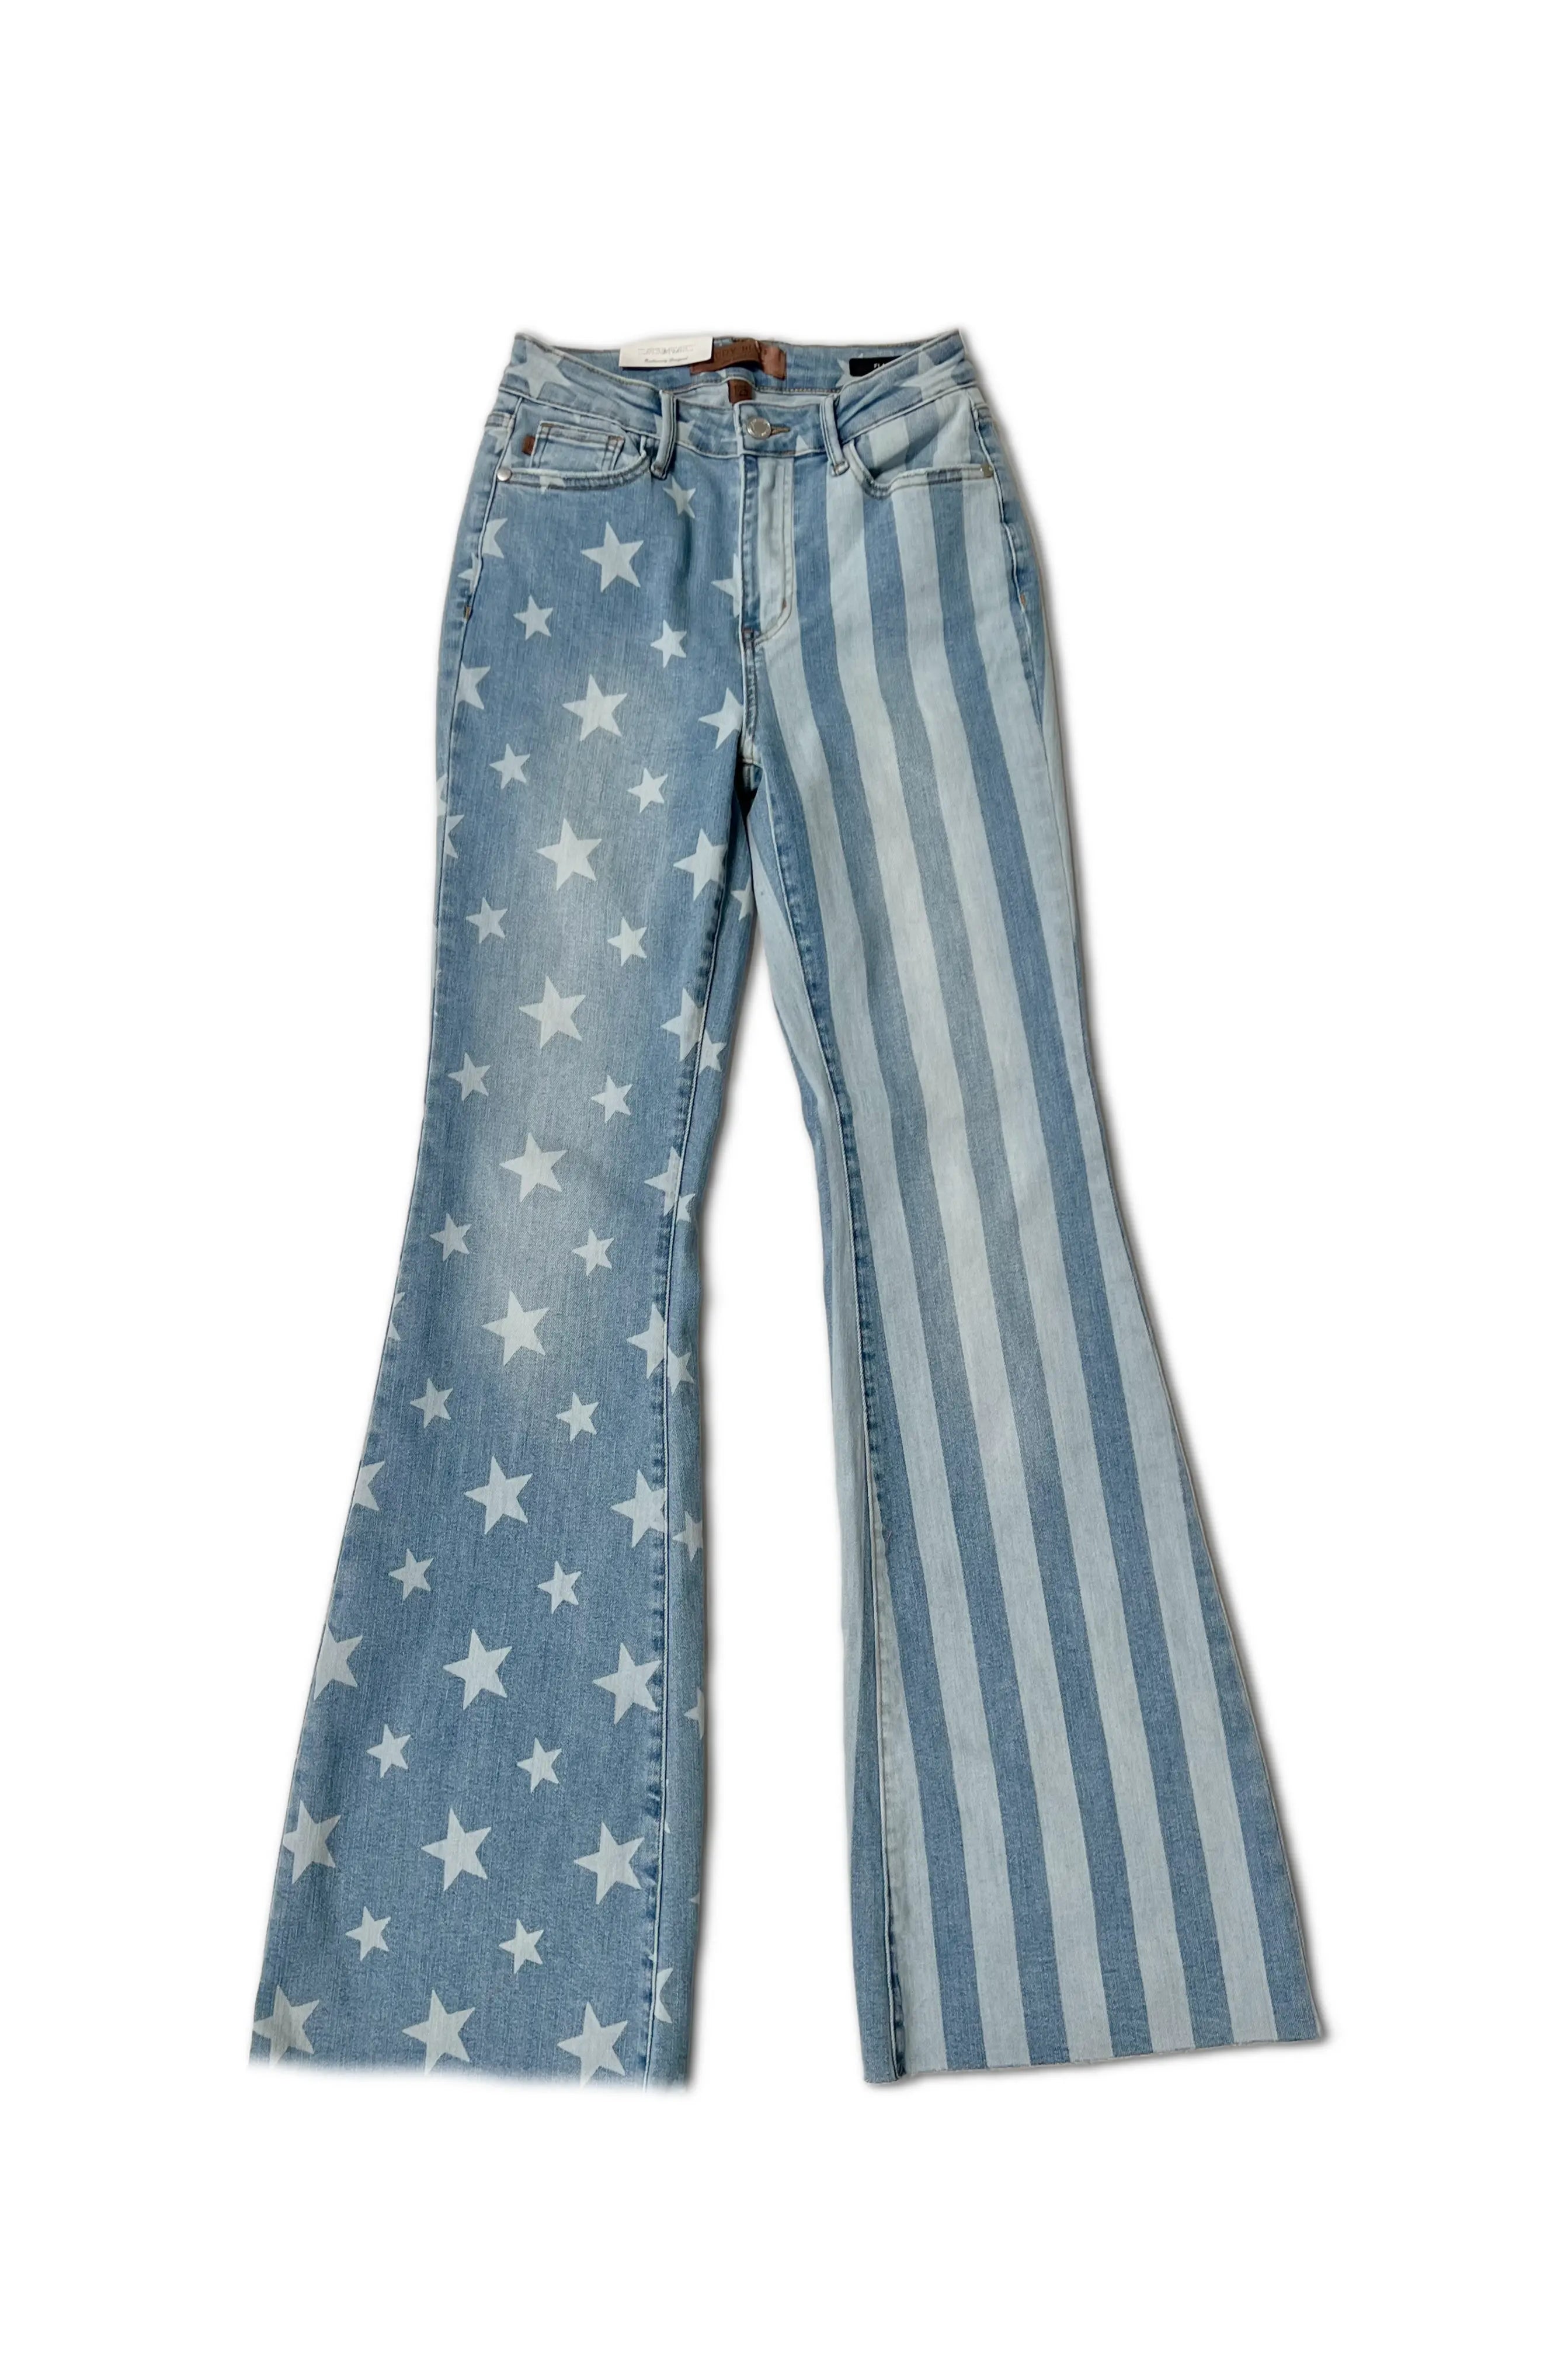 Freedom Rings - Judy Blue Flares JB Boutique Simplified